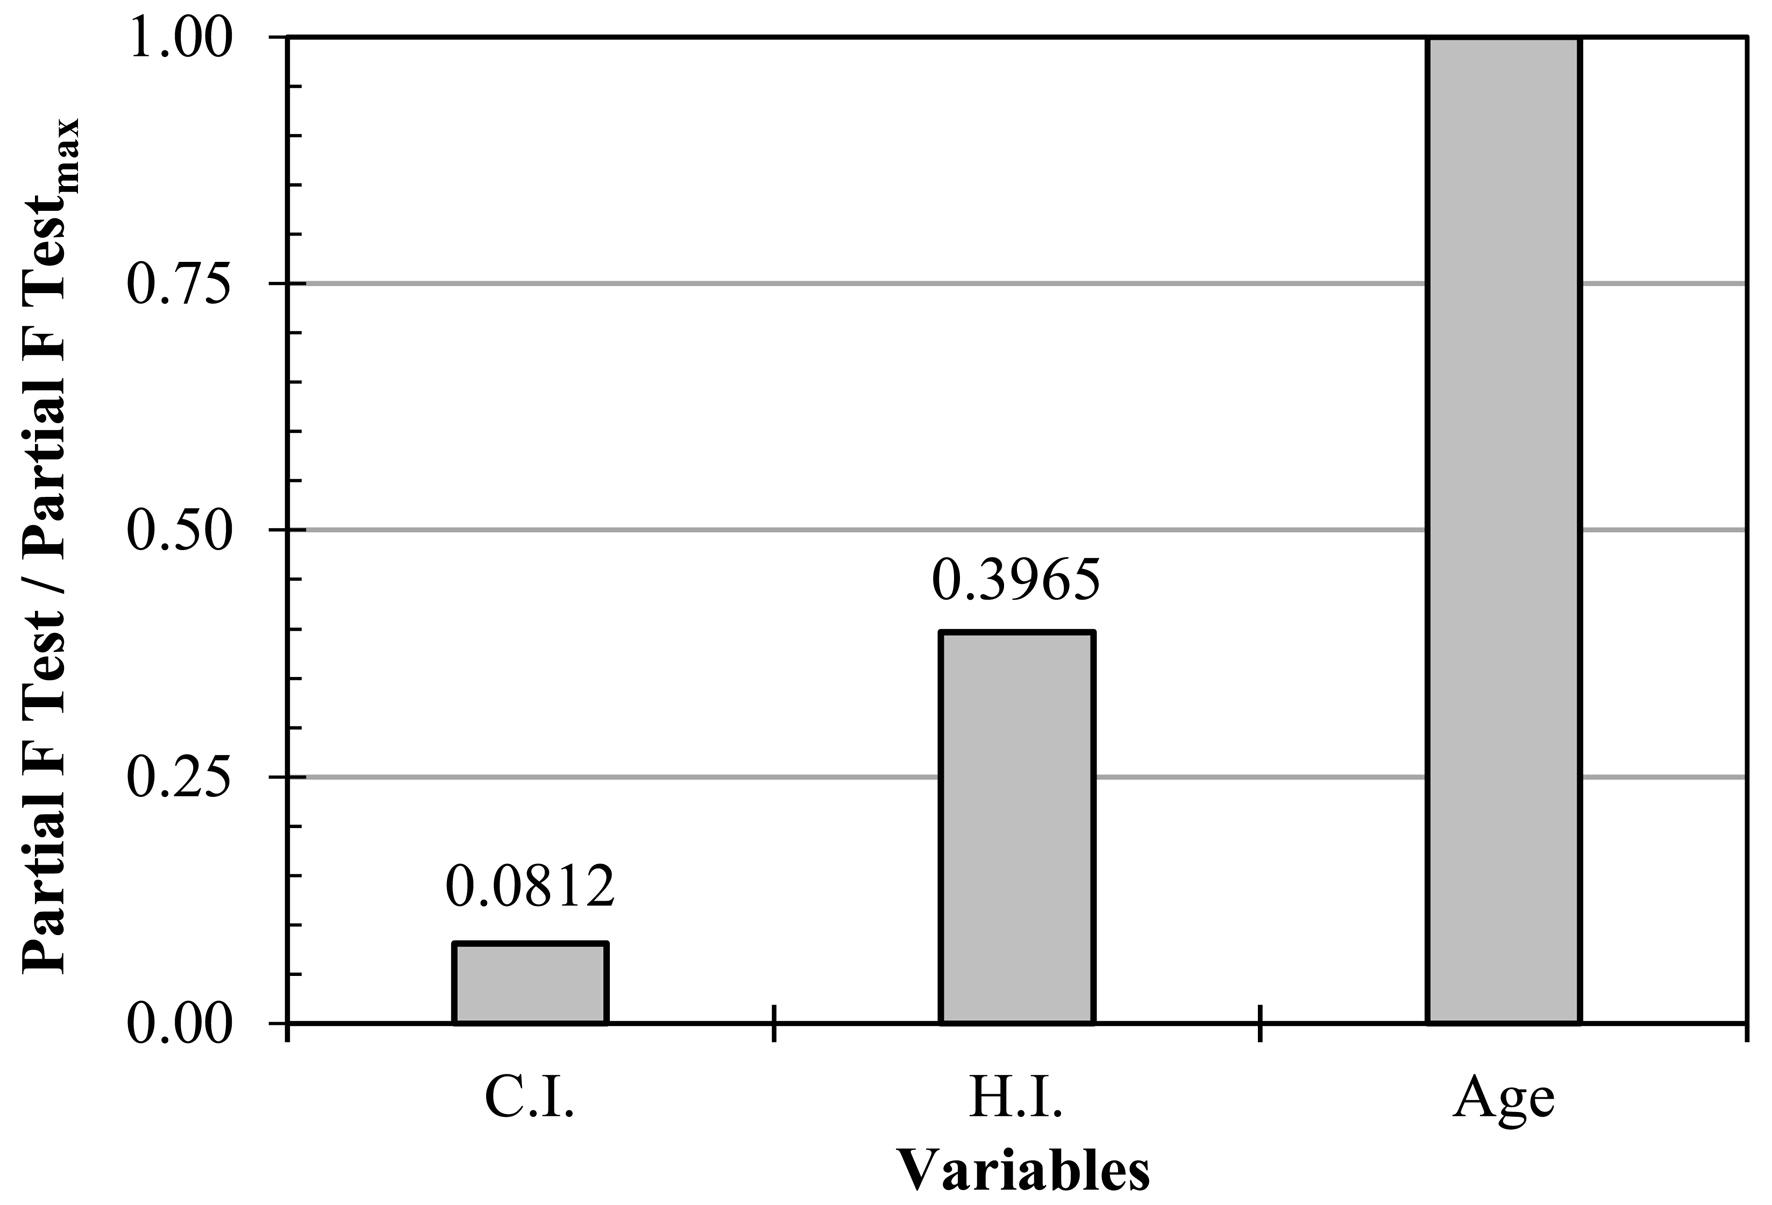 Values concerning the ratio between the partial F test obtained for each variable and the maximum partial F test obtained in the study.